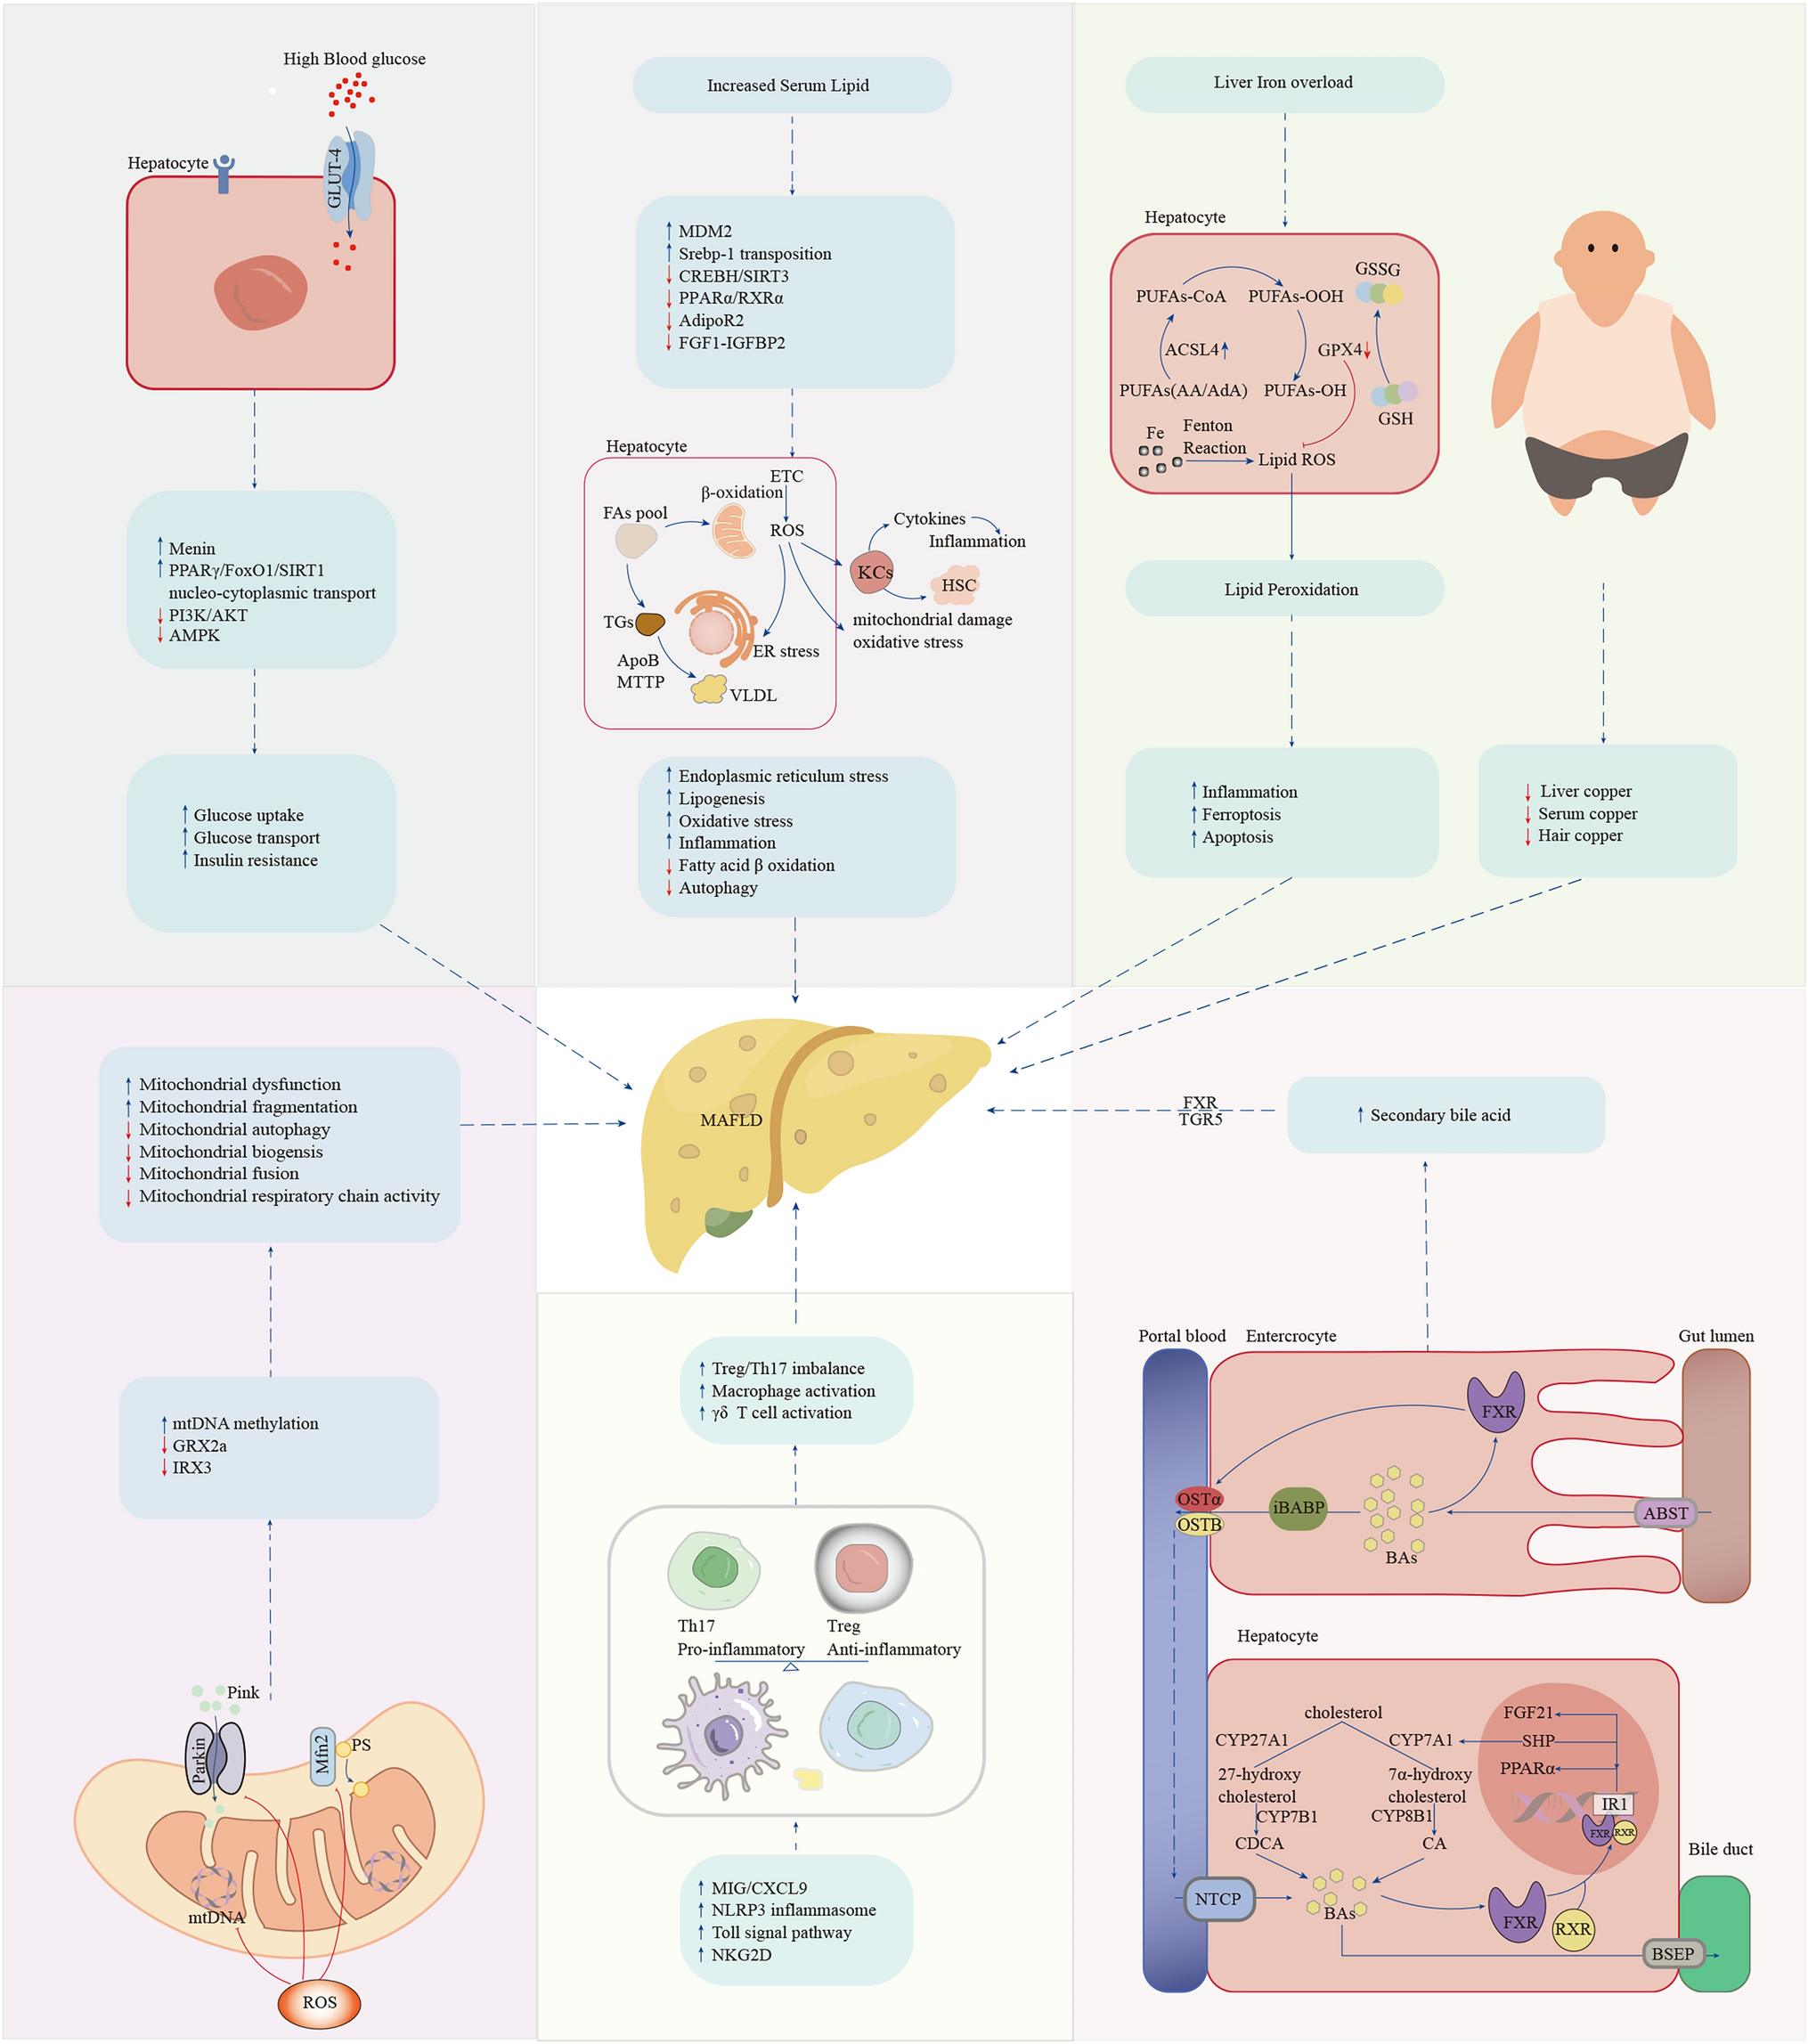 MAFLD as part of systemic metabolic dysregulation